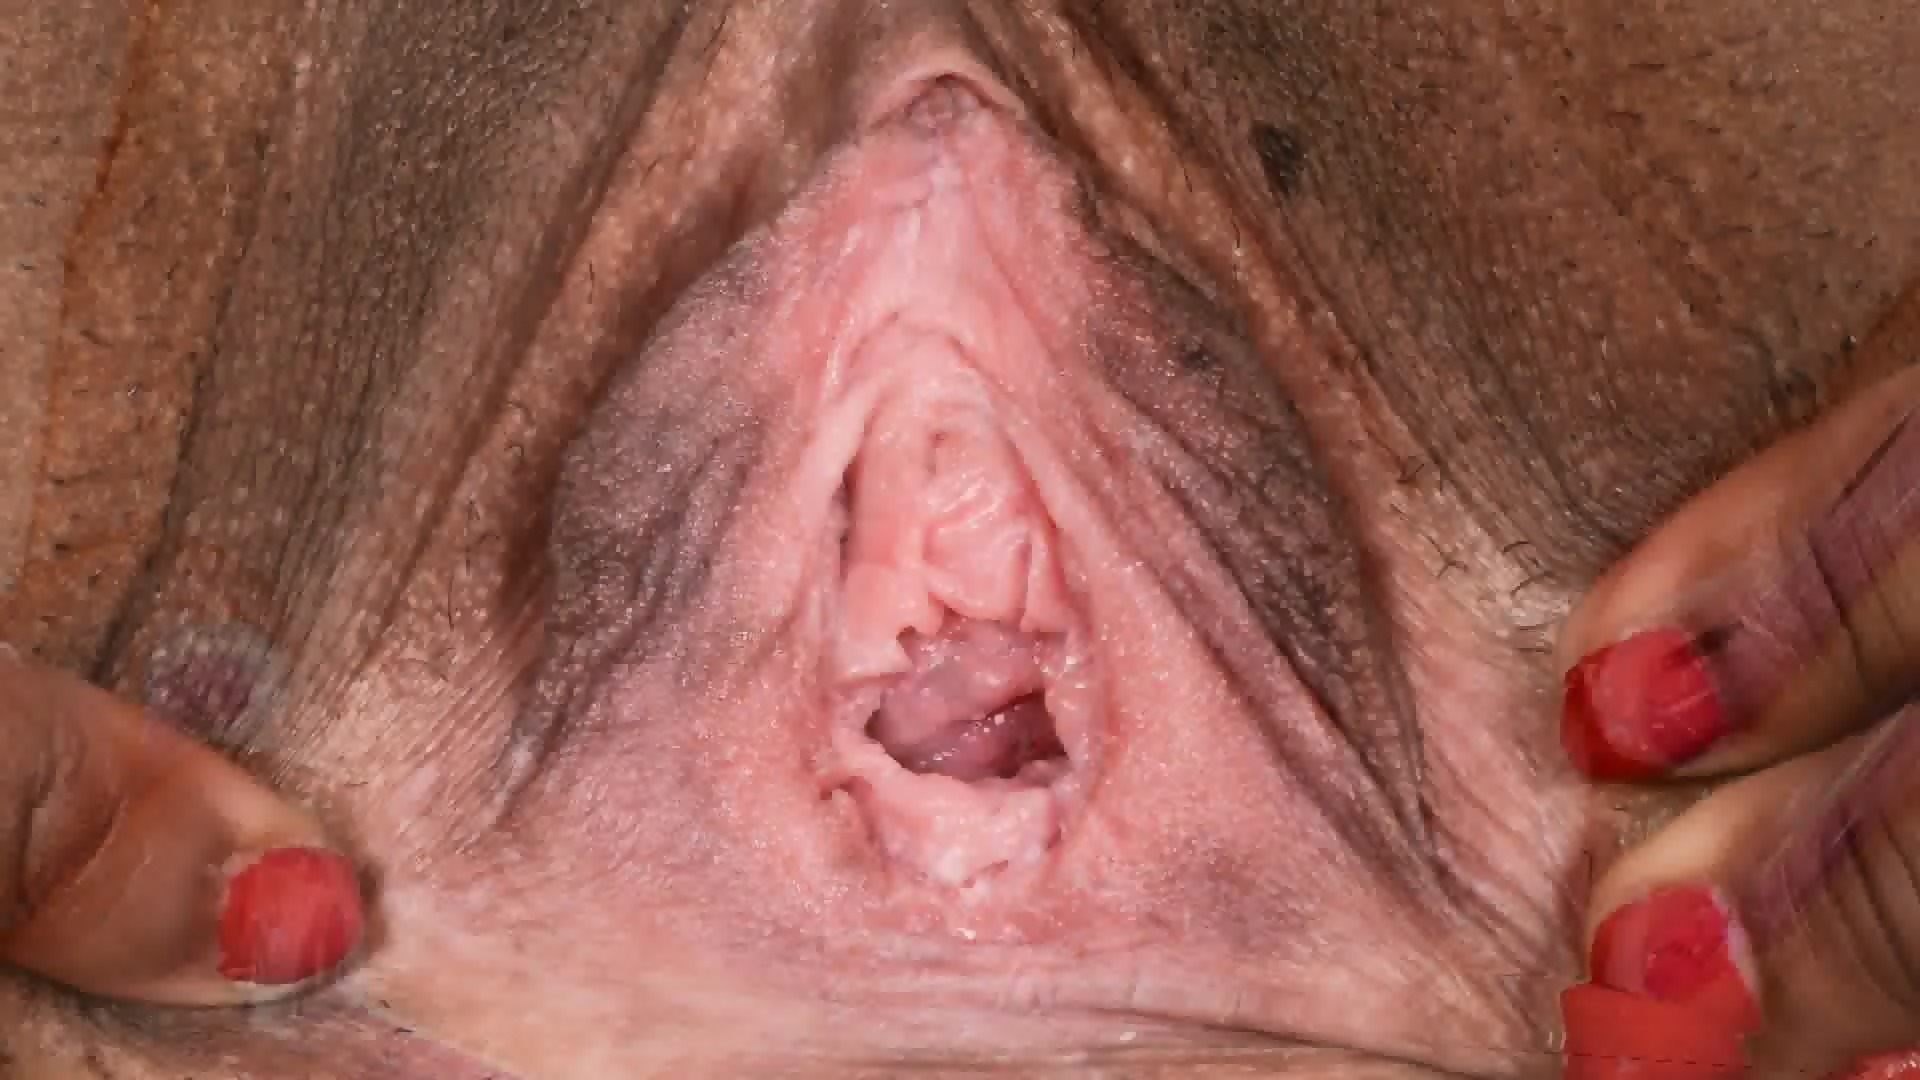 Female Textures Morphing 1 Hd 1080pvagina Close Up Hairy Sex Pussyby Rumesco Eporner